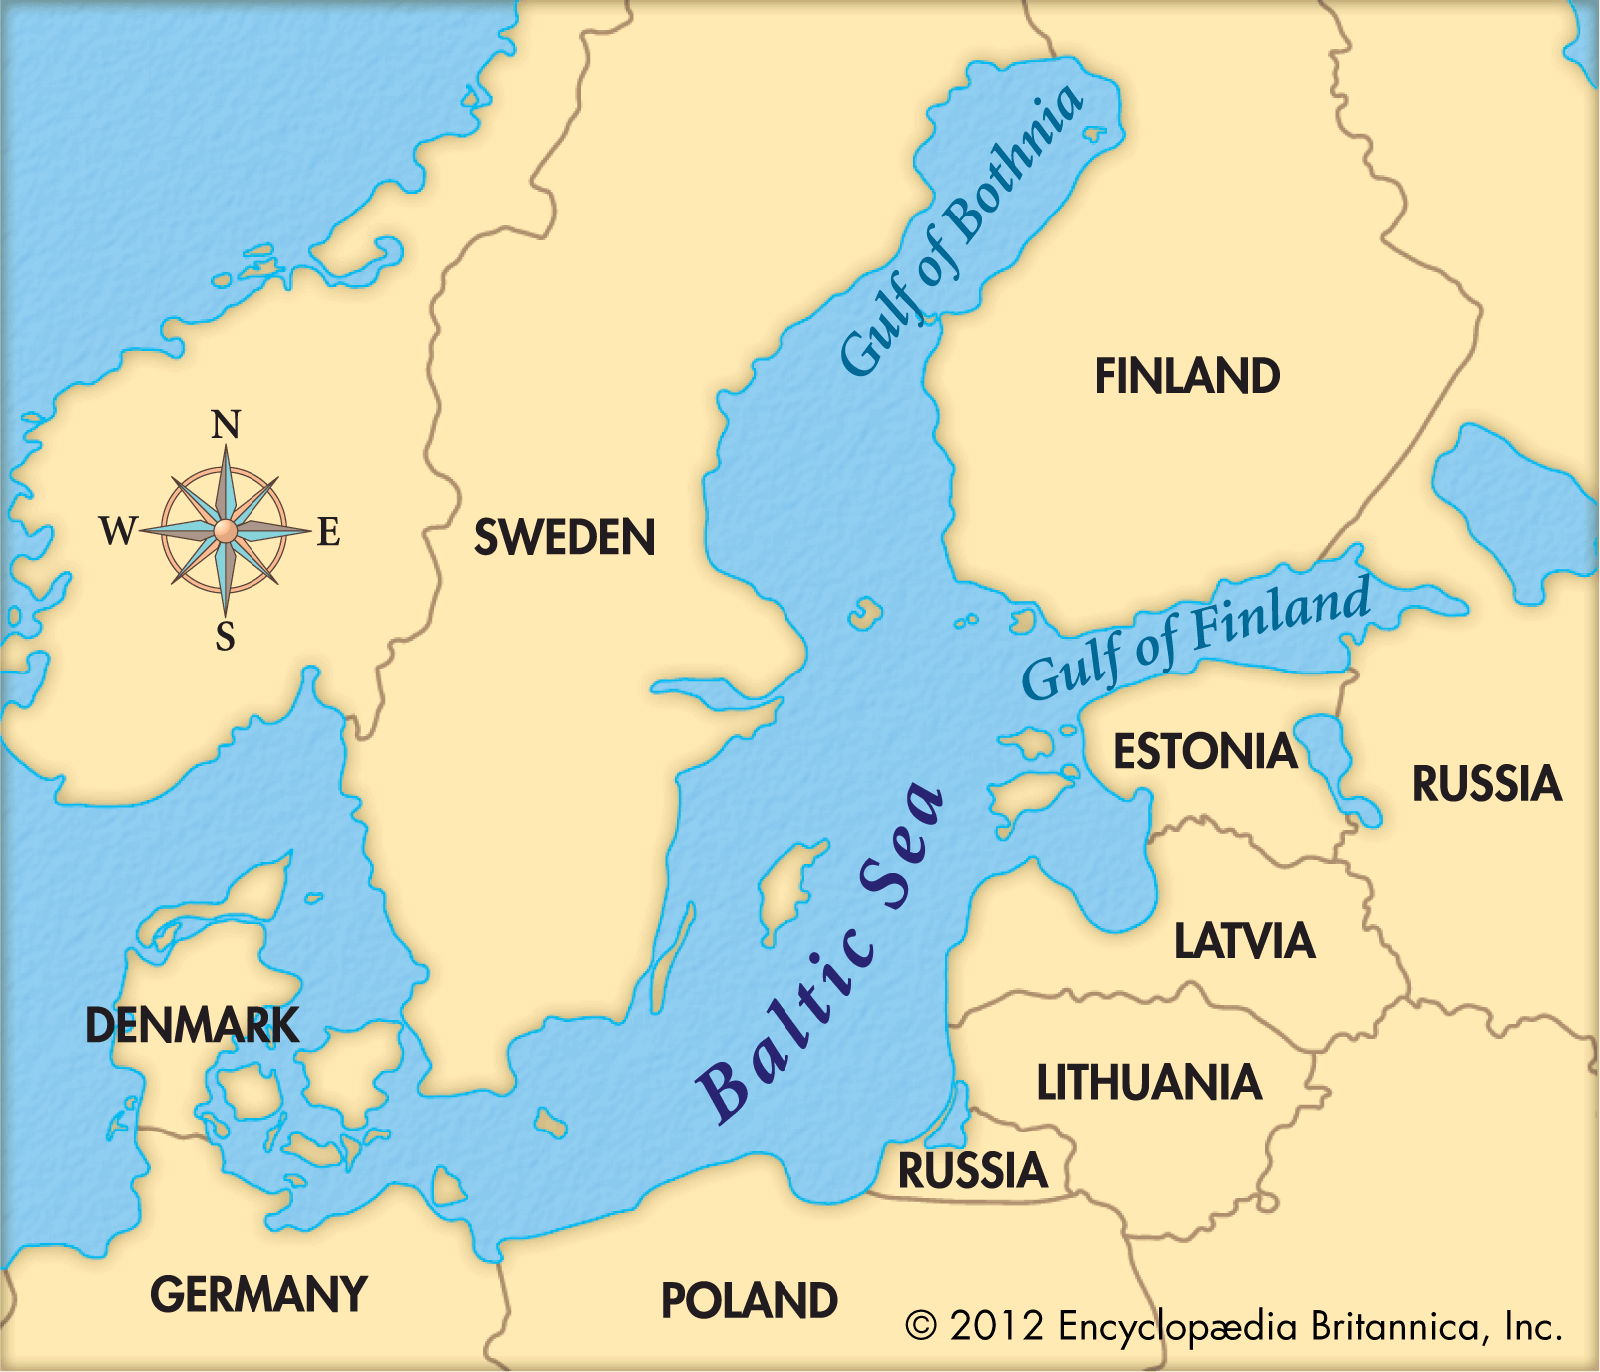  Germany seeks military influence in the Baltic Sea and establishes a military base in Lithuania. (Photo Internet reproduction)